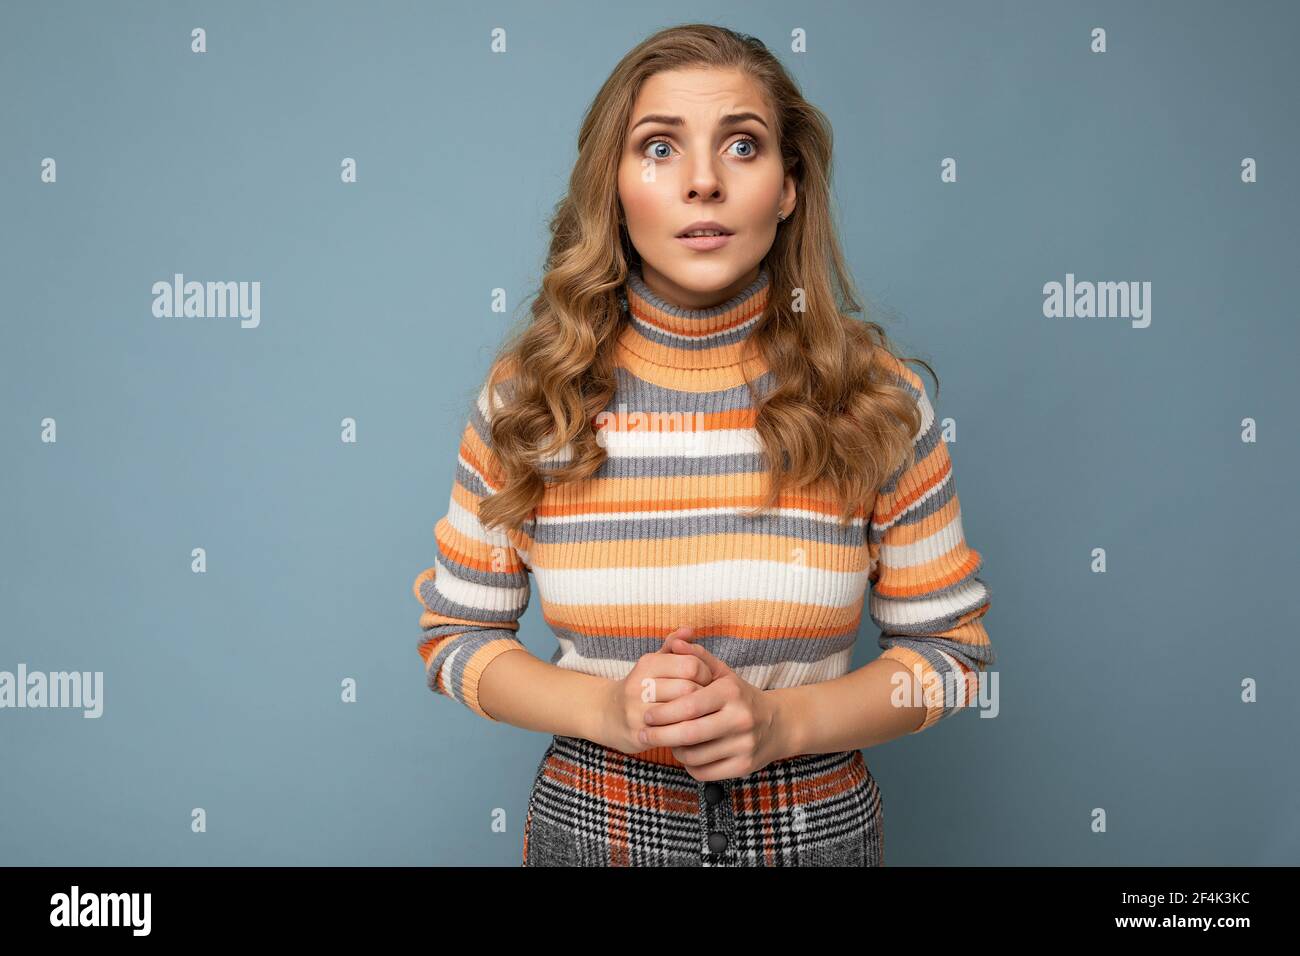 Photo portrait of young attractive beautiful sad upset touchy blonde woman with sincere emotions wearing striped pullover isolated on blue background Stock Photo